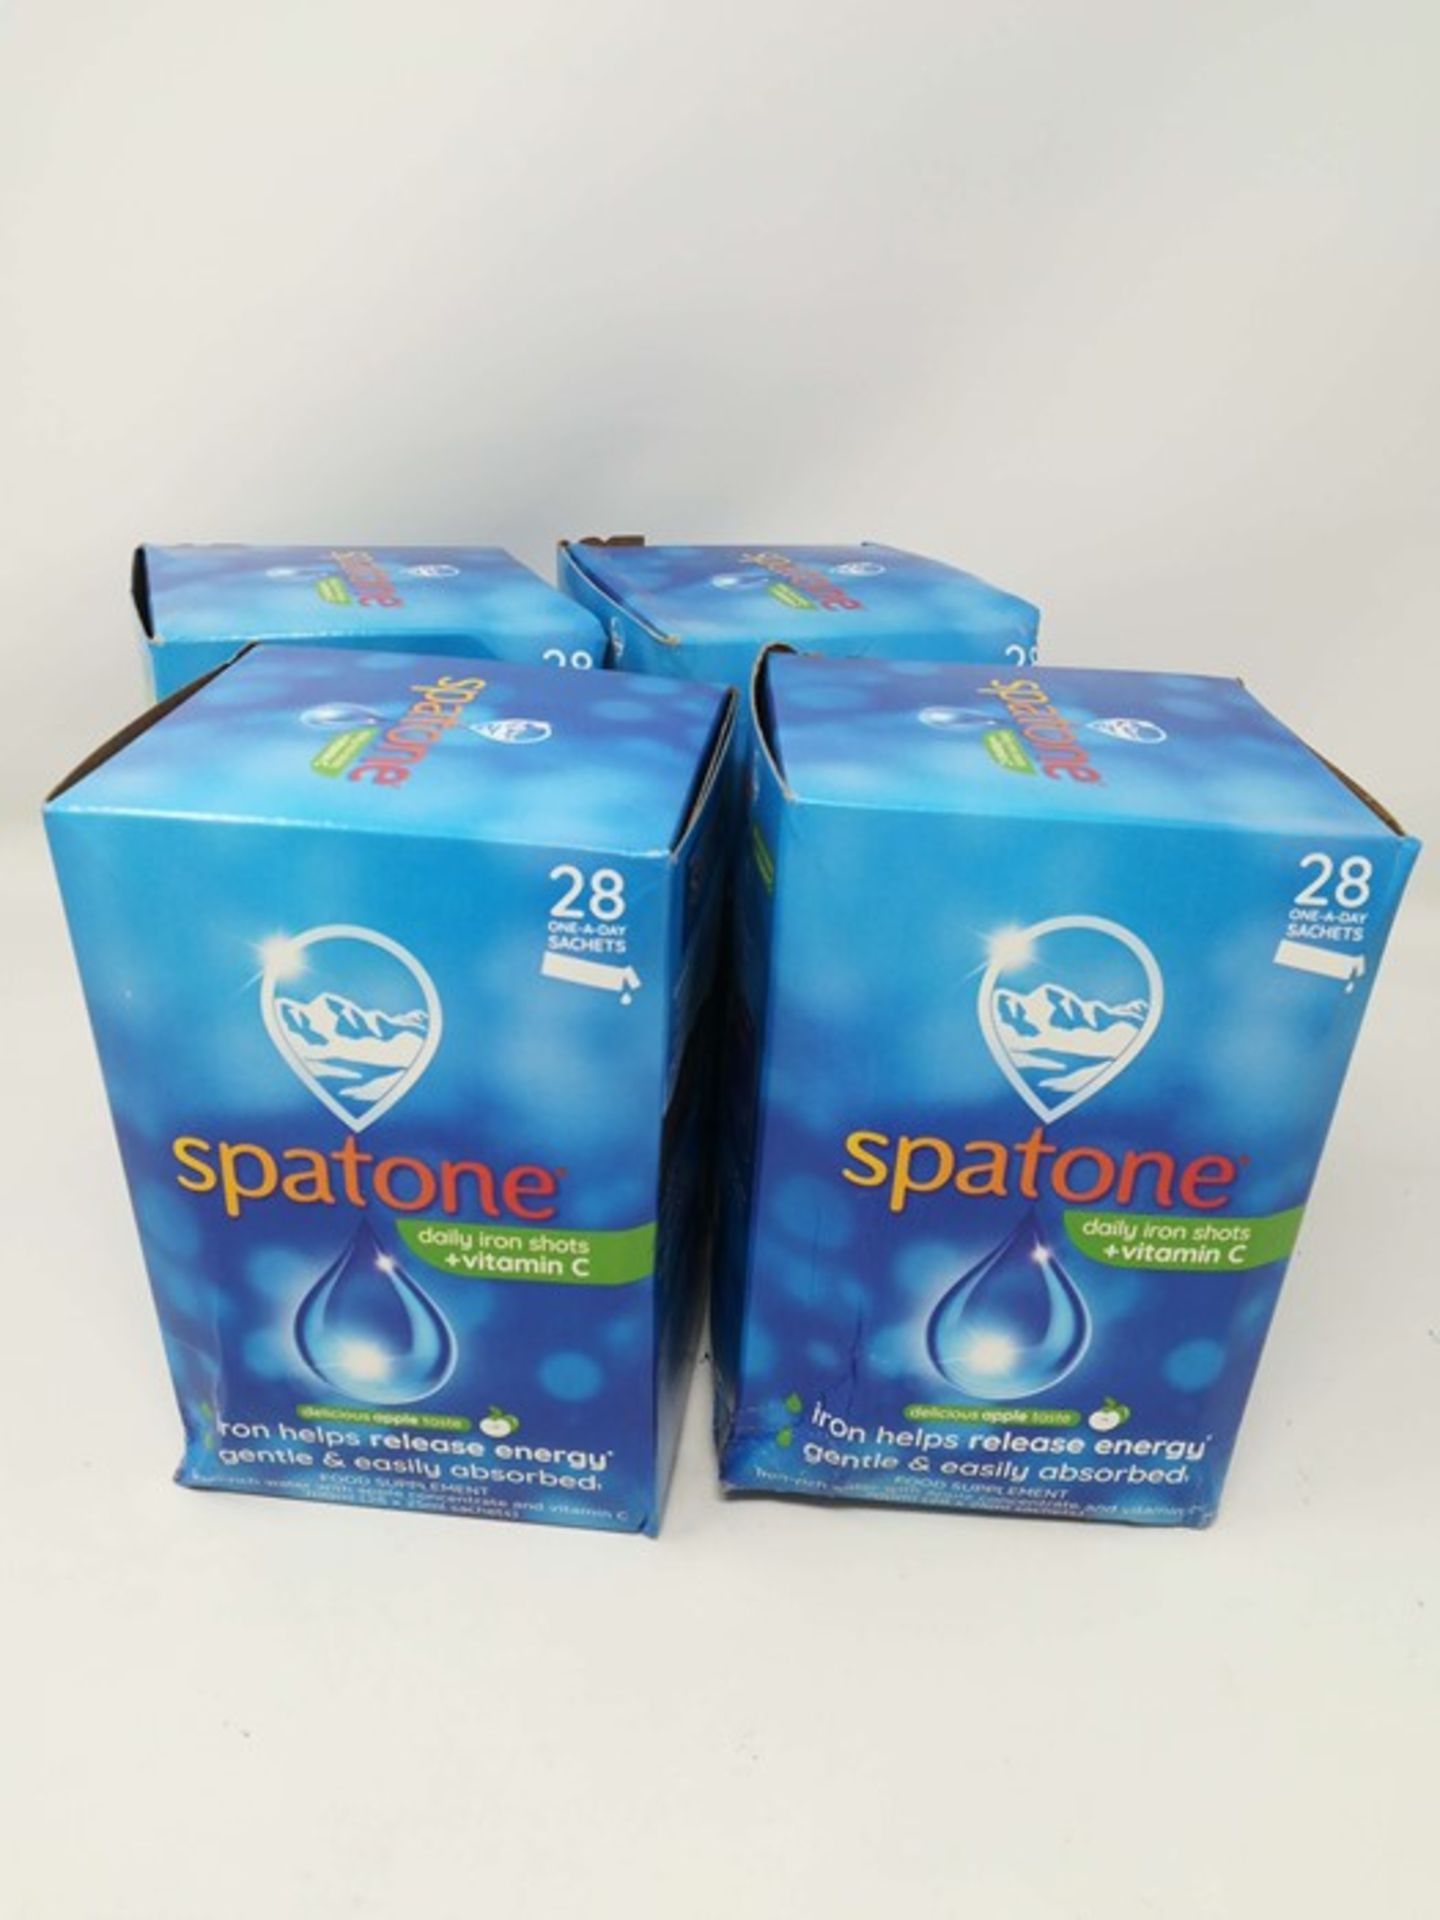 (4 PACK) - Spatone Spatone Apple - 28 Day Pack ( - Image 2 of 2